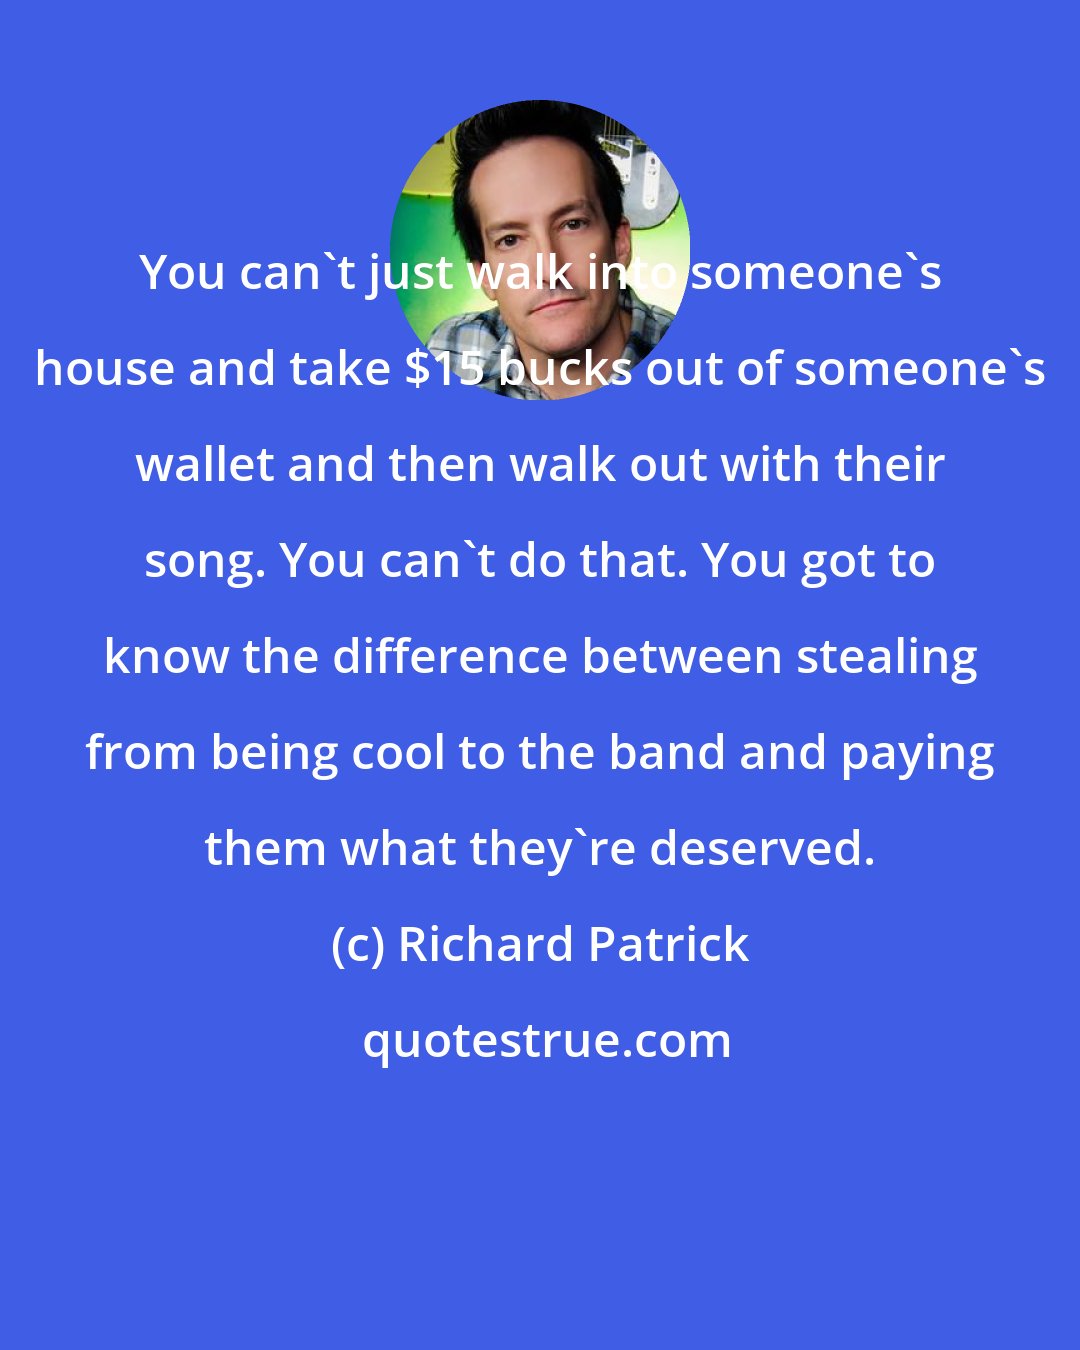 Richard Patrick: You can't just walk into someone's house and take $15 bucks out of someone's wallet and then walk out with their song. You can't do that. You got to know the difference between stealing from being cool to the band and paying them what they're deserved.